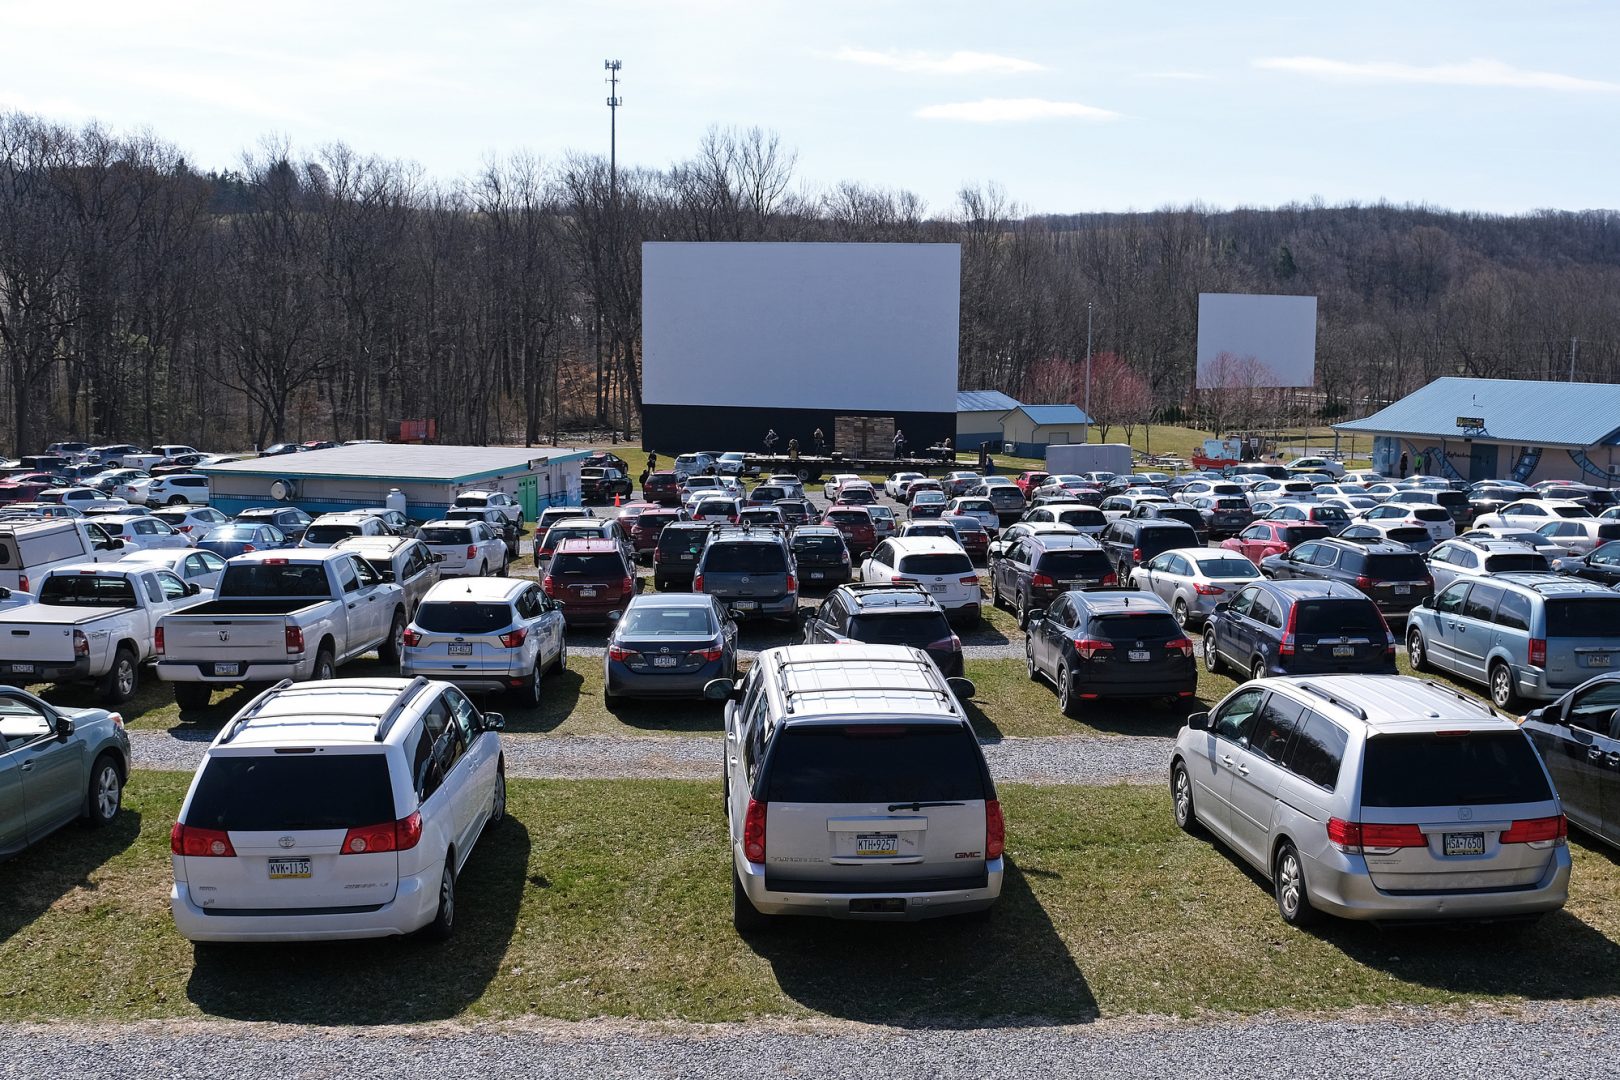 Bethany Wesleyan Church holds Sunday worship service Mar. 22, 2020, at Becky's Drive-In in Walnutport, Pennsylvania. Concerns over the coronavirus have closed churches in an effort to avoid gatherings of large crowds. 